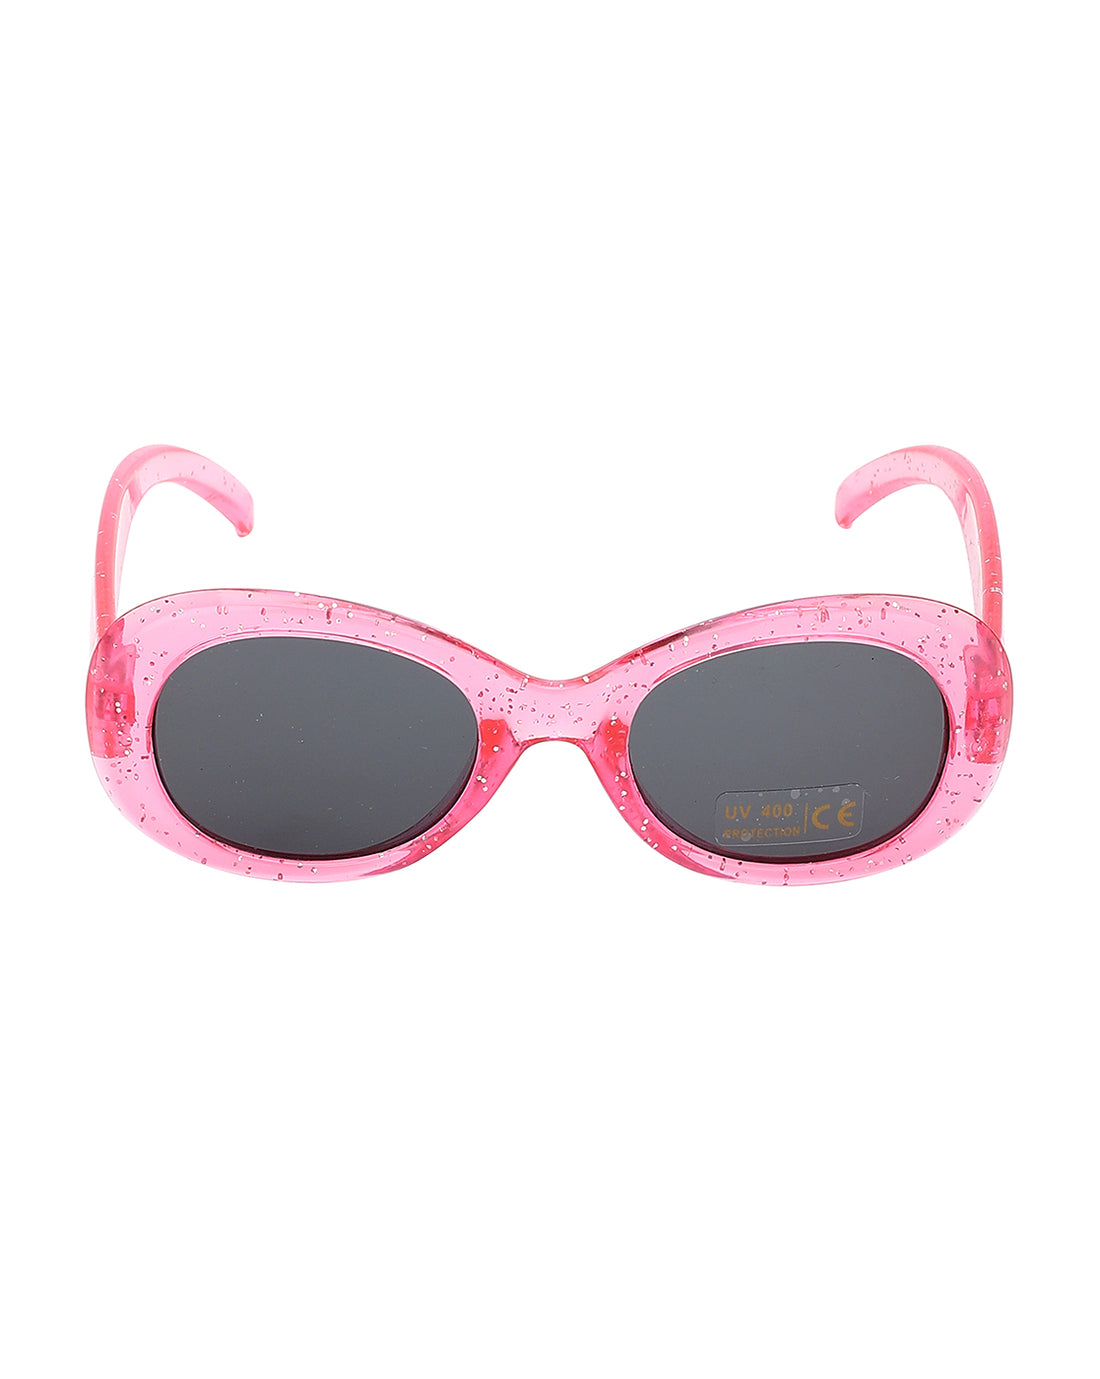 Carlton London Oval Sunglasses With Uv Protected Lens For Girl